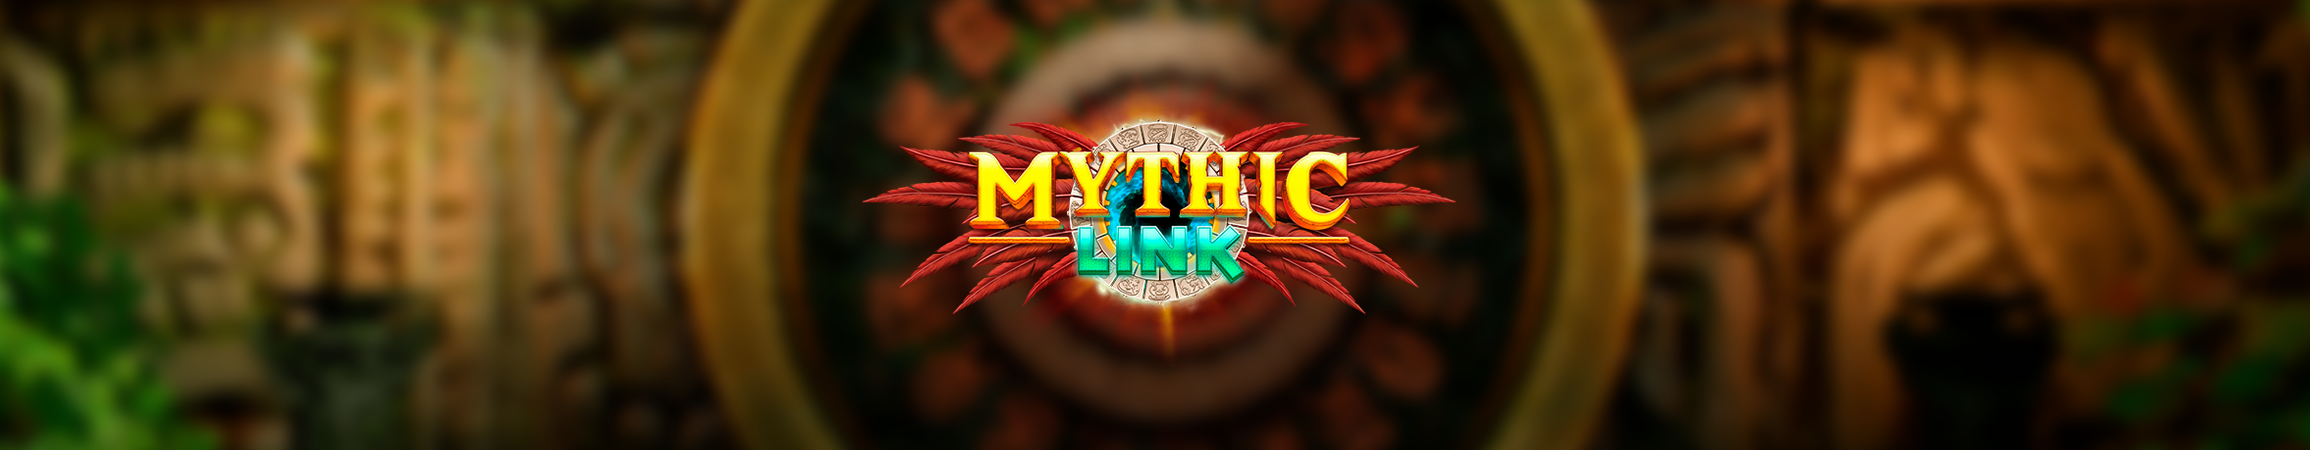 Mythic Link is the new FBM Multi-Game product available in Mexico